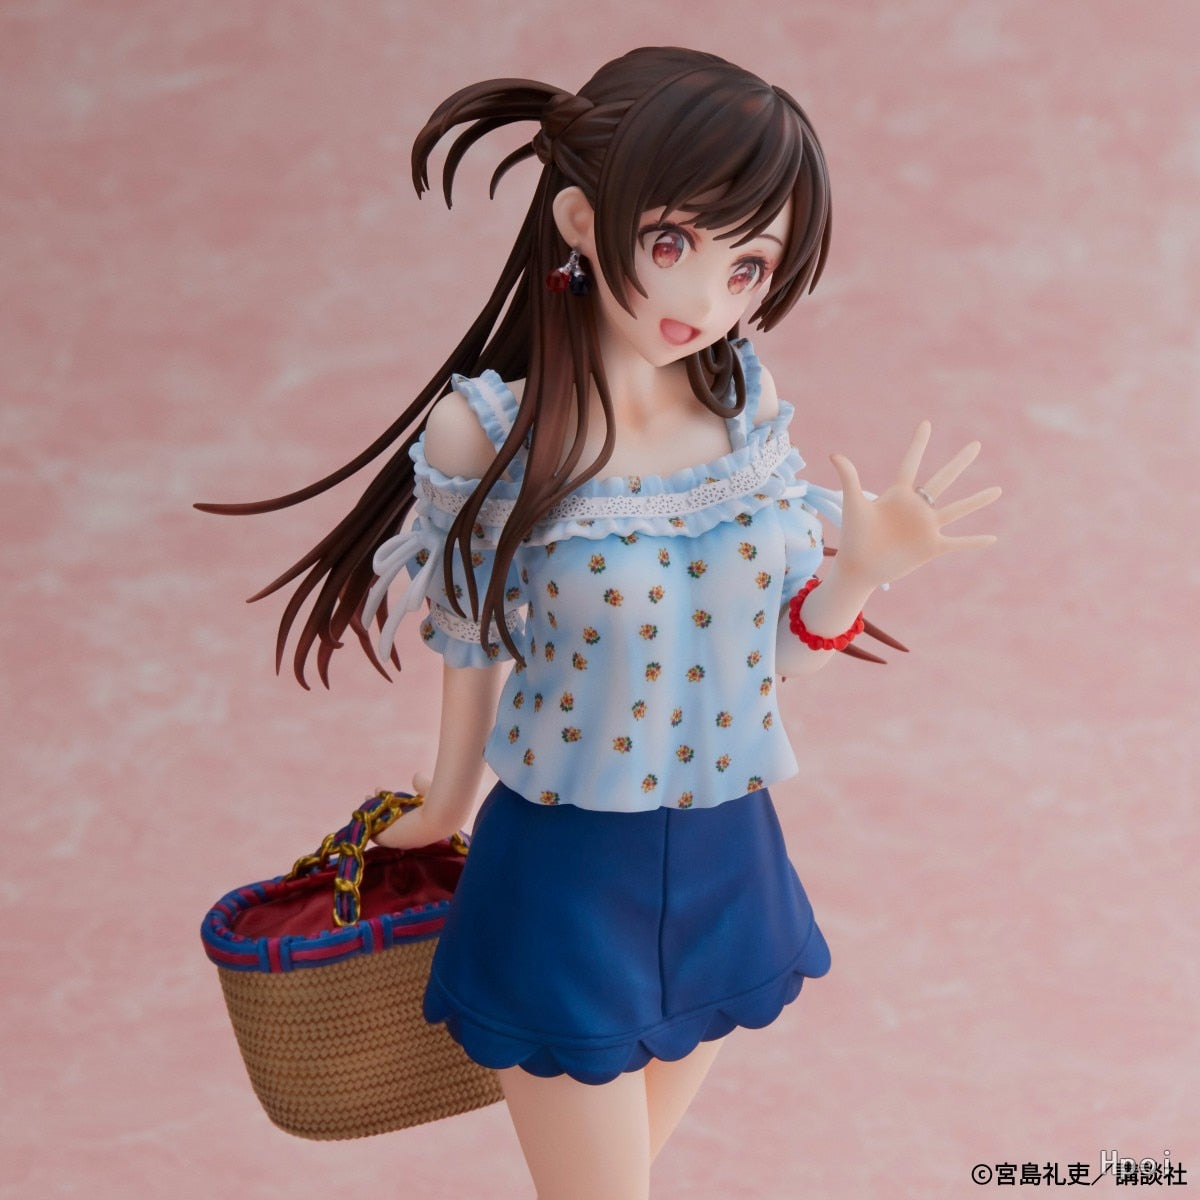 This figurines immerse Chizuru a dynamic pose that reflects her lively personality. If you are looking for more Rent-A-Girlfriend Merch, We have it all! | Check out all our Anime Merch now!